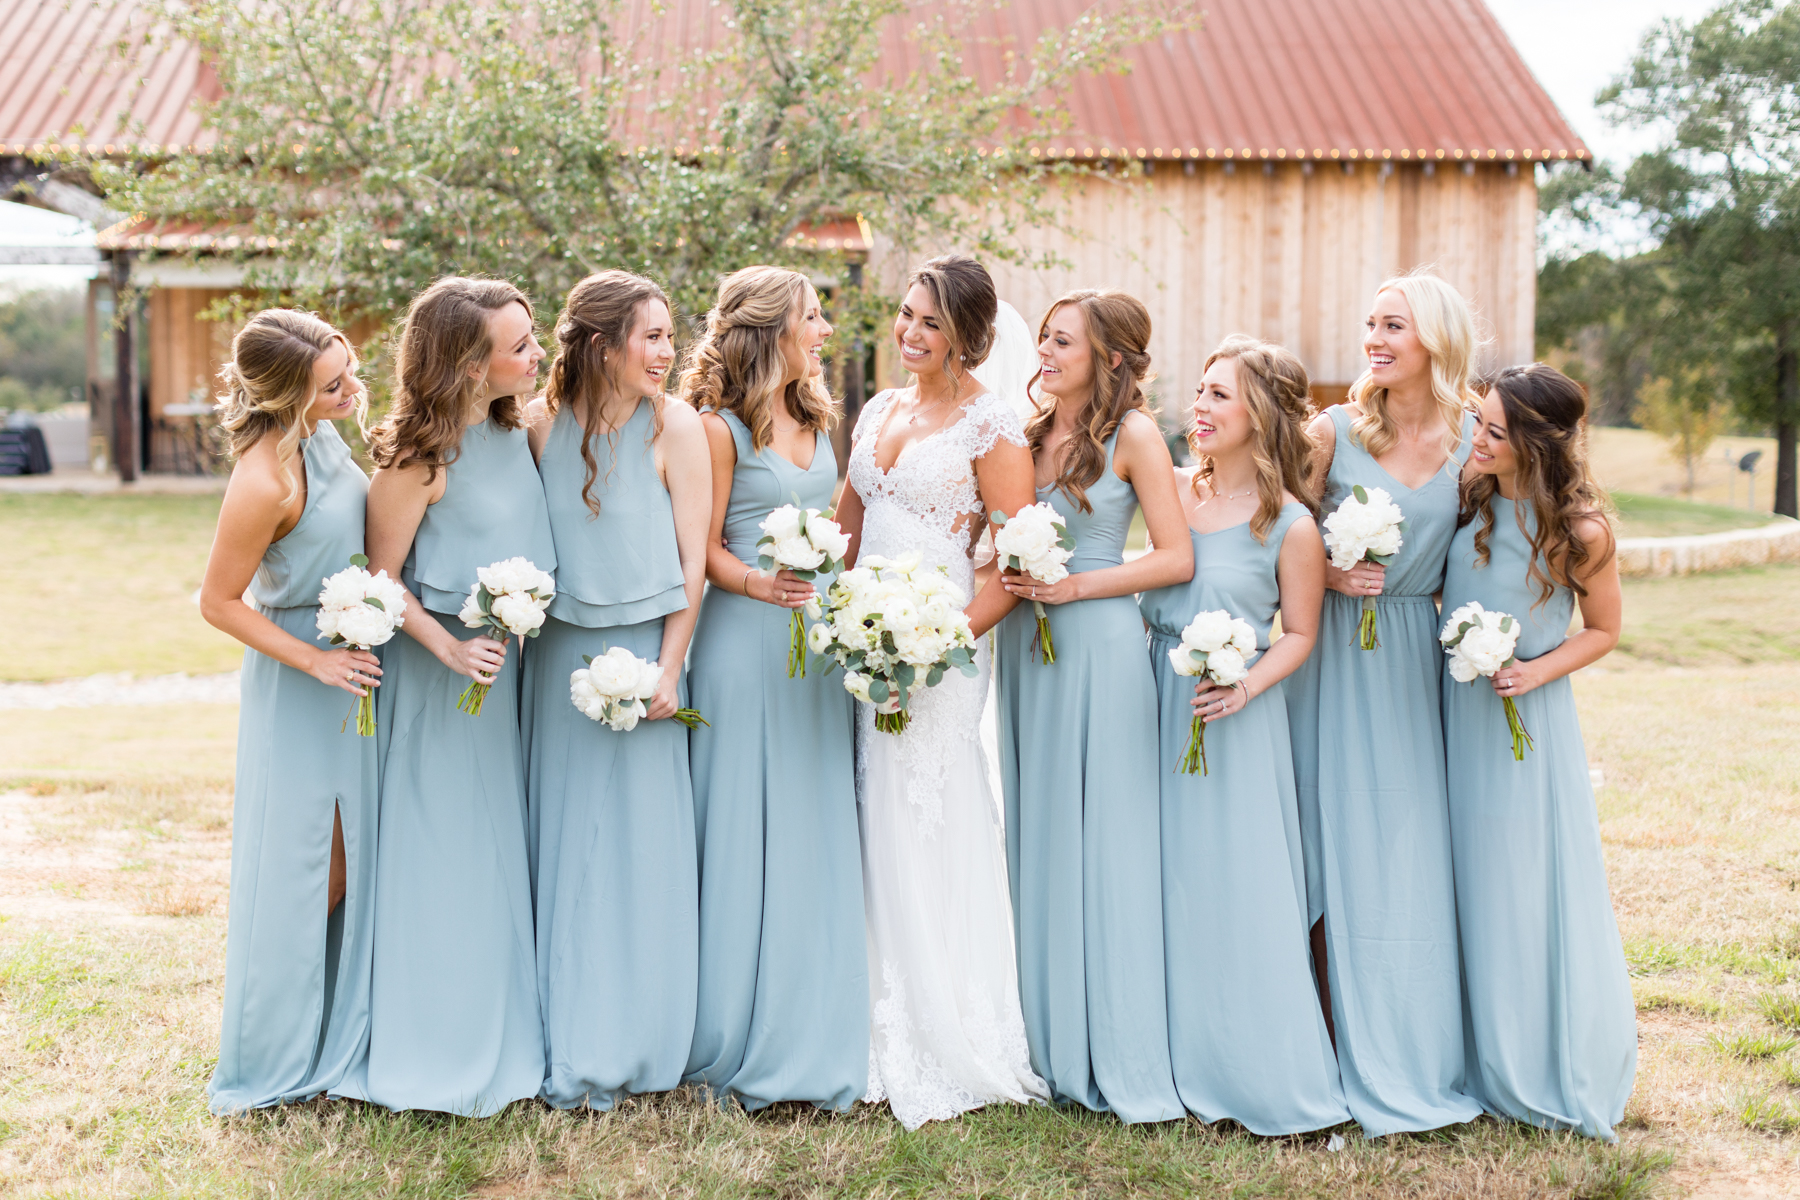 The bride and her wedding party in front of the reception barn at her family's ranch